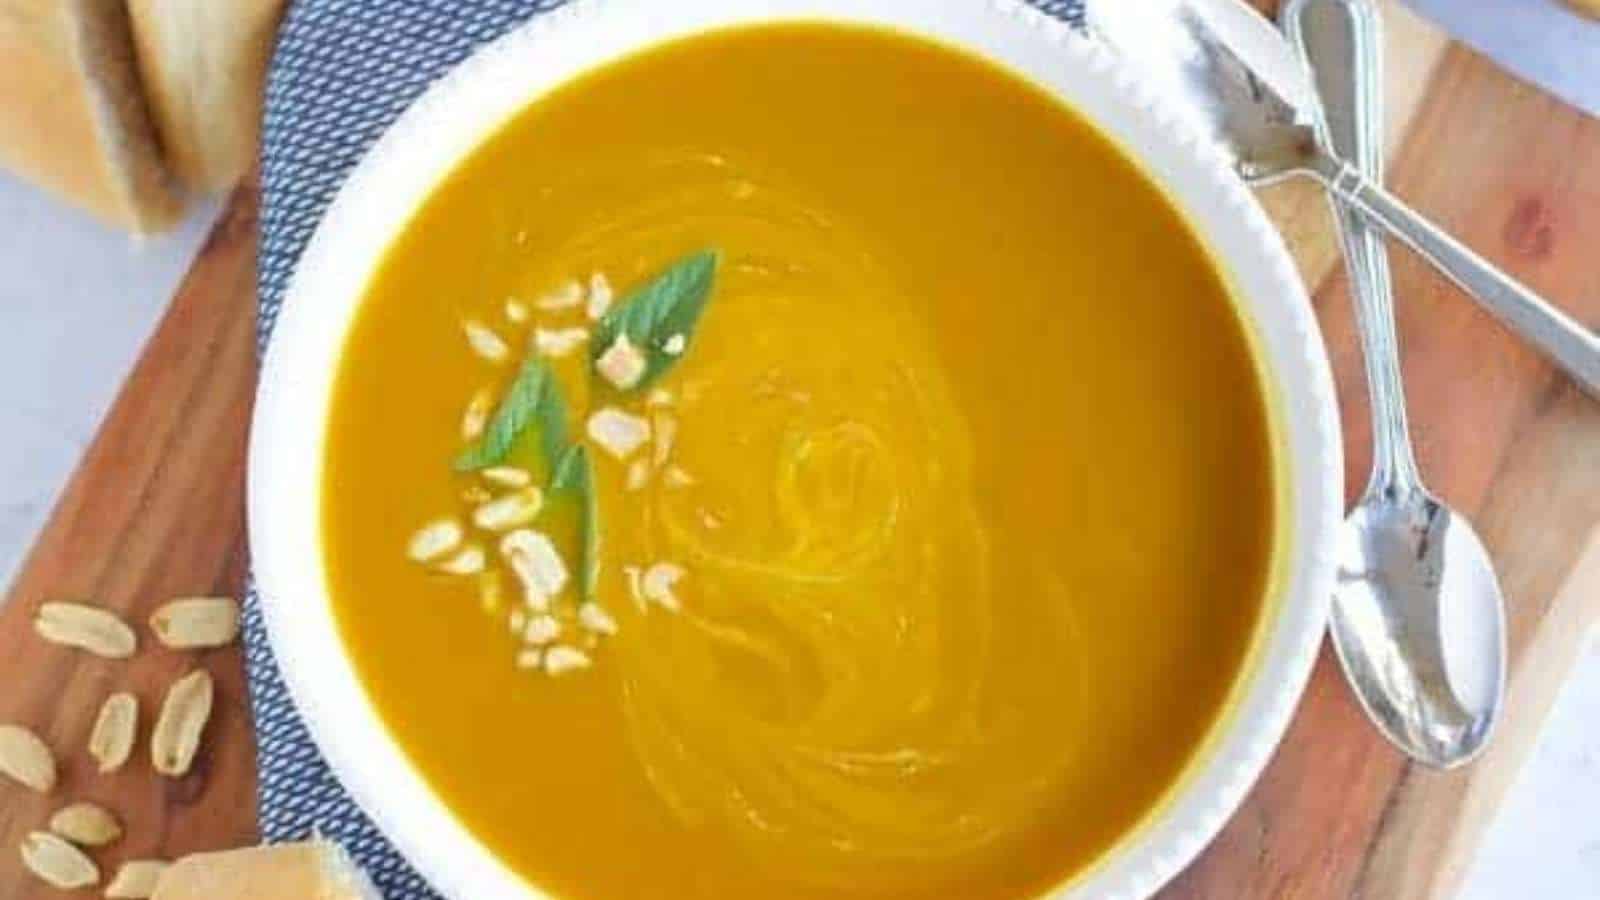 A bowl of pumpkin soup on a cutting board.